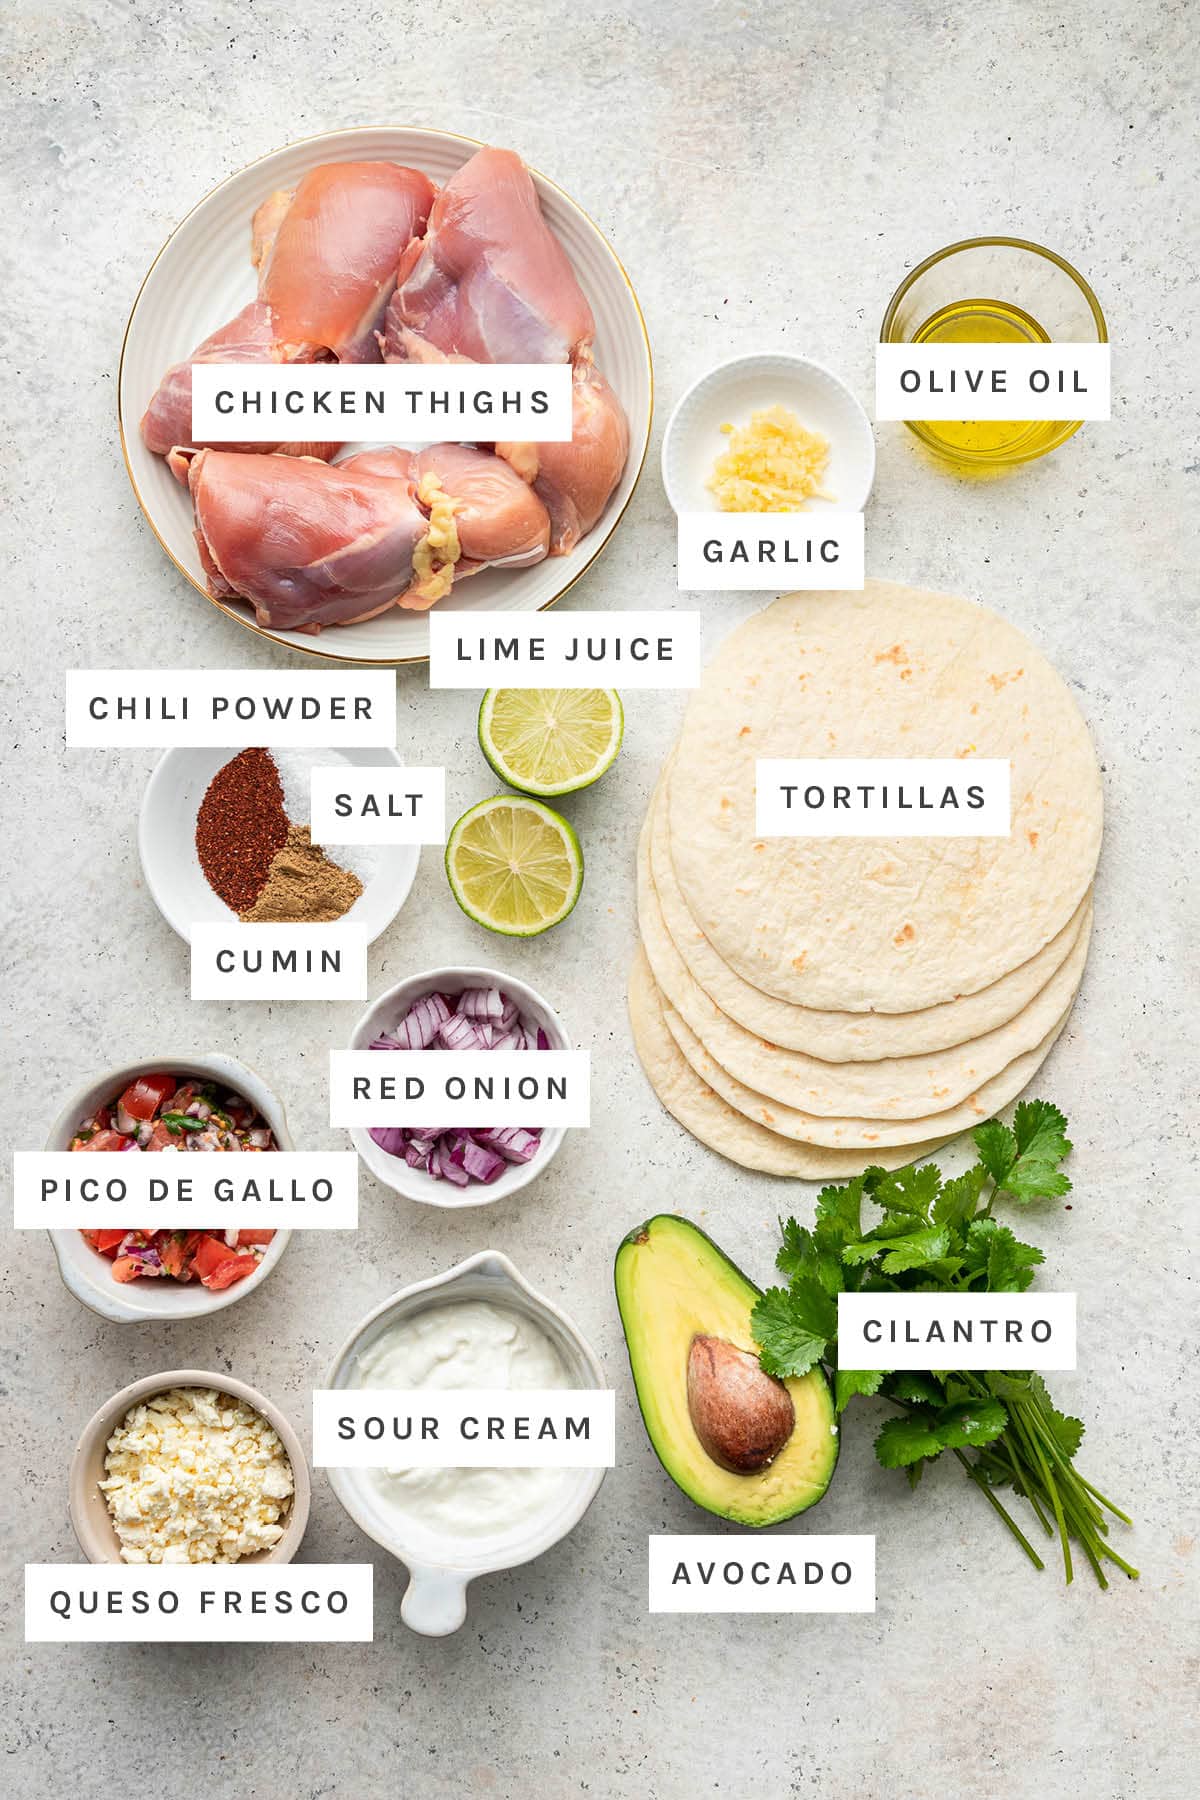 Ingredients measured out to make Healthy Chicken Tacos: chicken thighs, garlic, olive oil, lime, chili powder, salt, cumin, red onion, tortillas, pico de gallo, queso fresco, sour cream, avocado and cilantro.